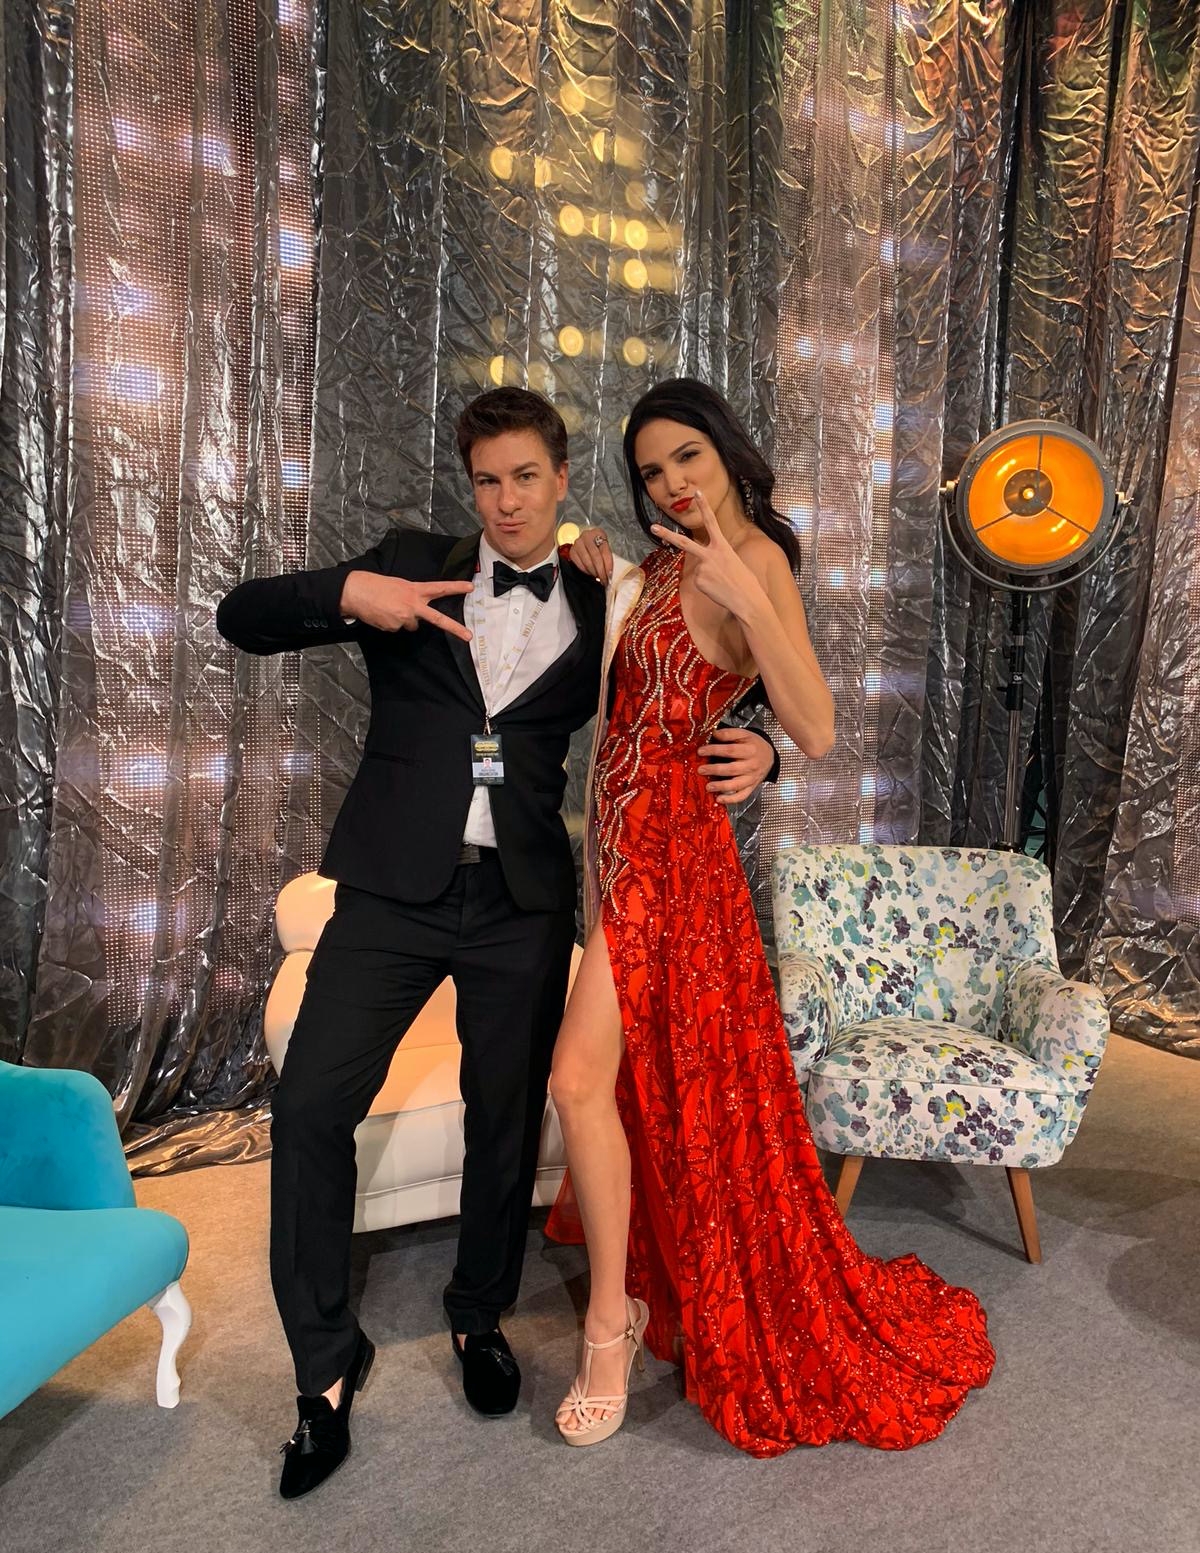 Andre Sleigh and Valeria Vazquez Miss Supranational 2018 from Puerto Rico